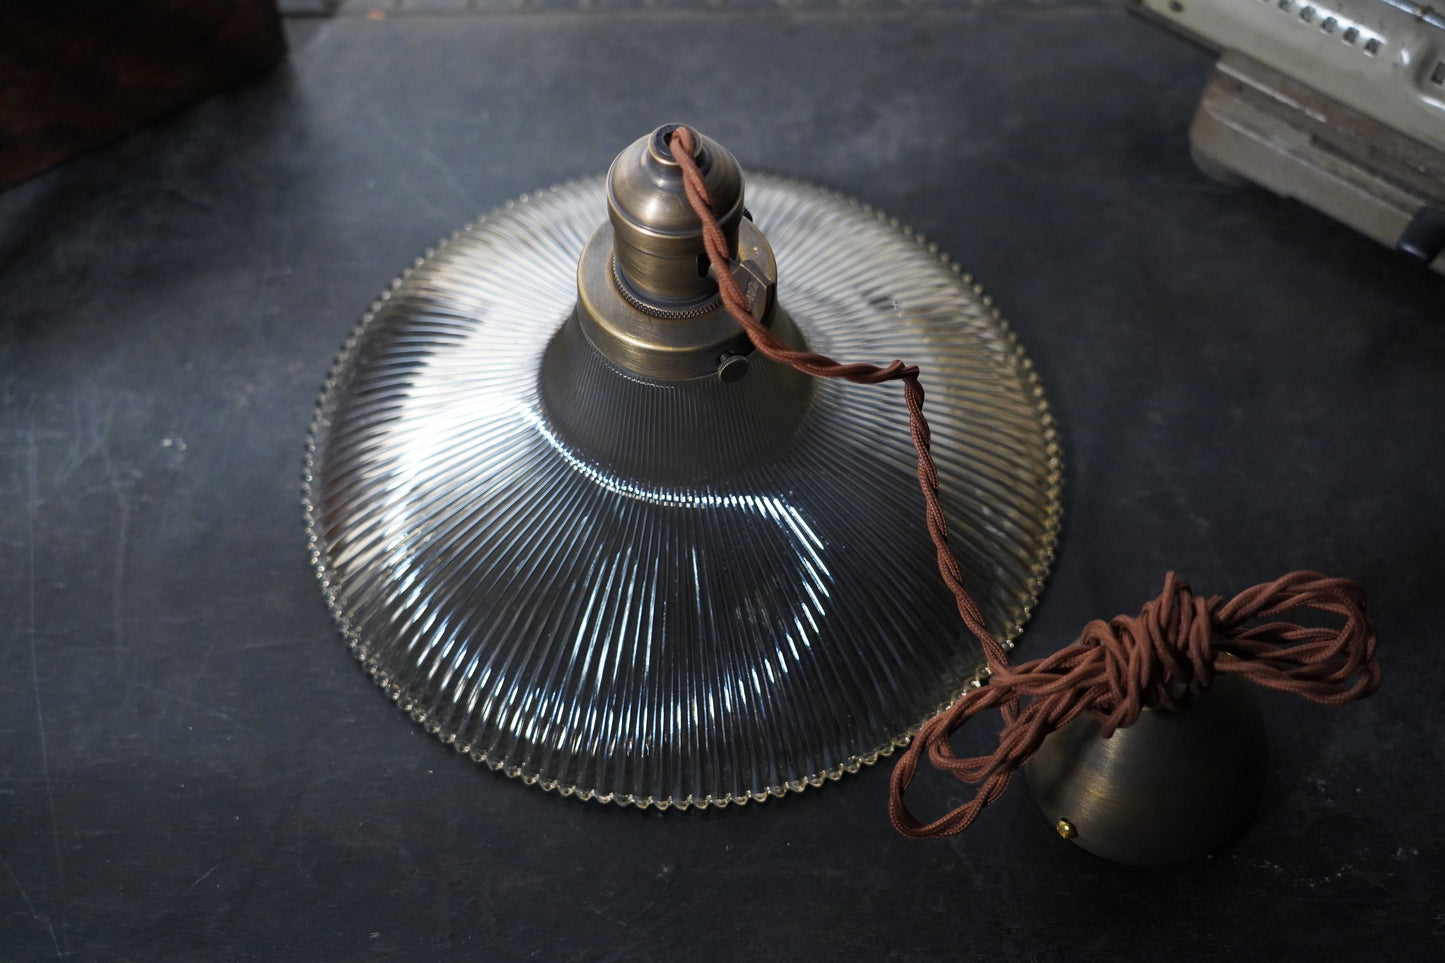 Rope Ray - Vintage Industrial Brass and Glass Pendant Light